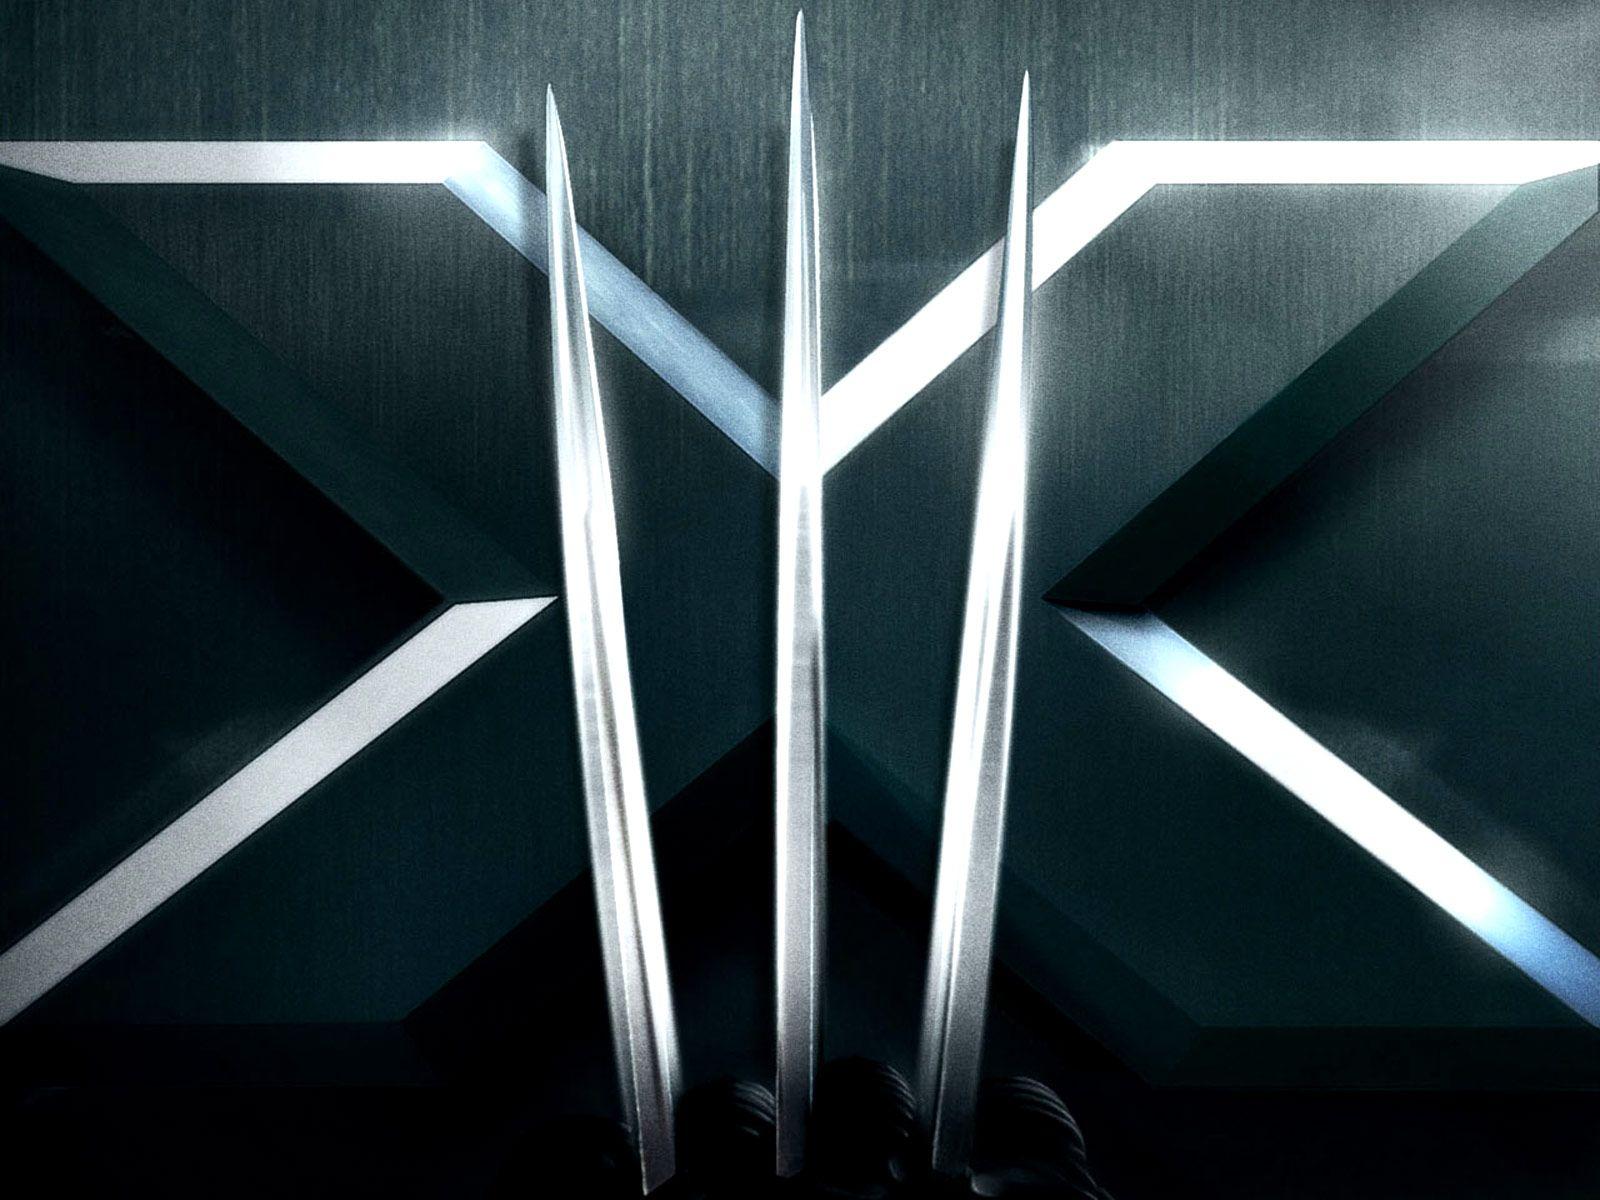 Wonderful x men wallpaper for android In Image Wallpaper with x men